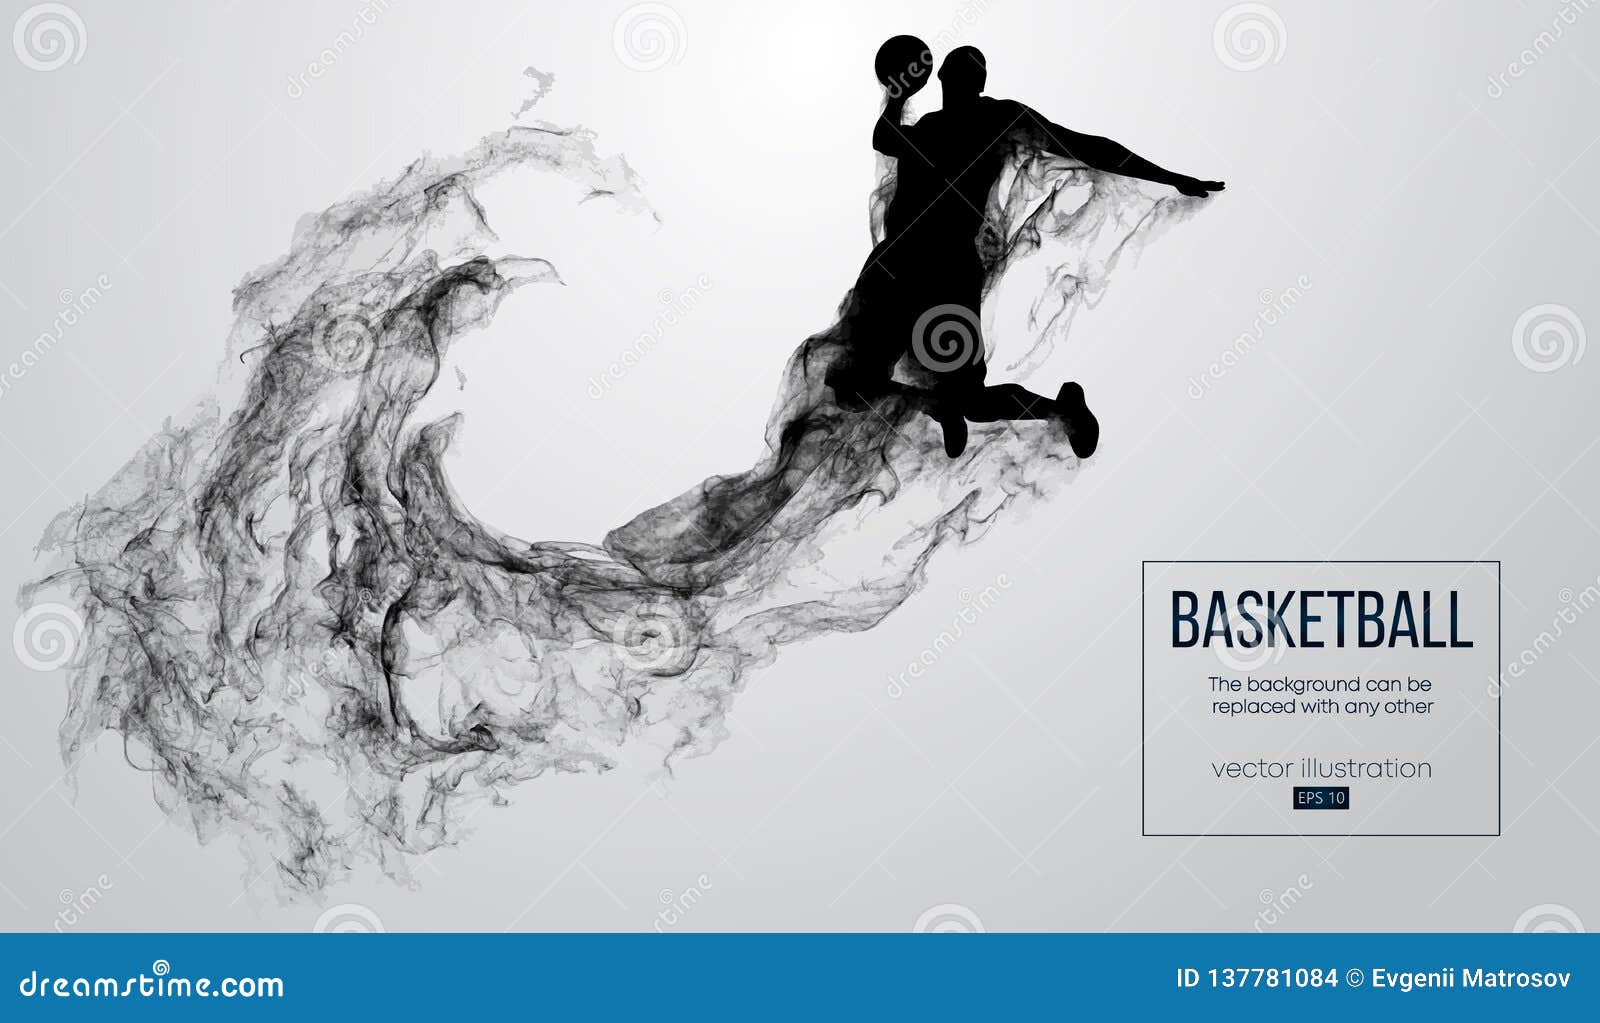 abstract silhouette of a basketball player on white background. basketball player jumping and performs slam dunk.